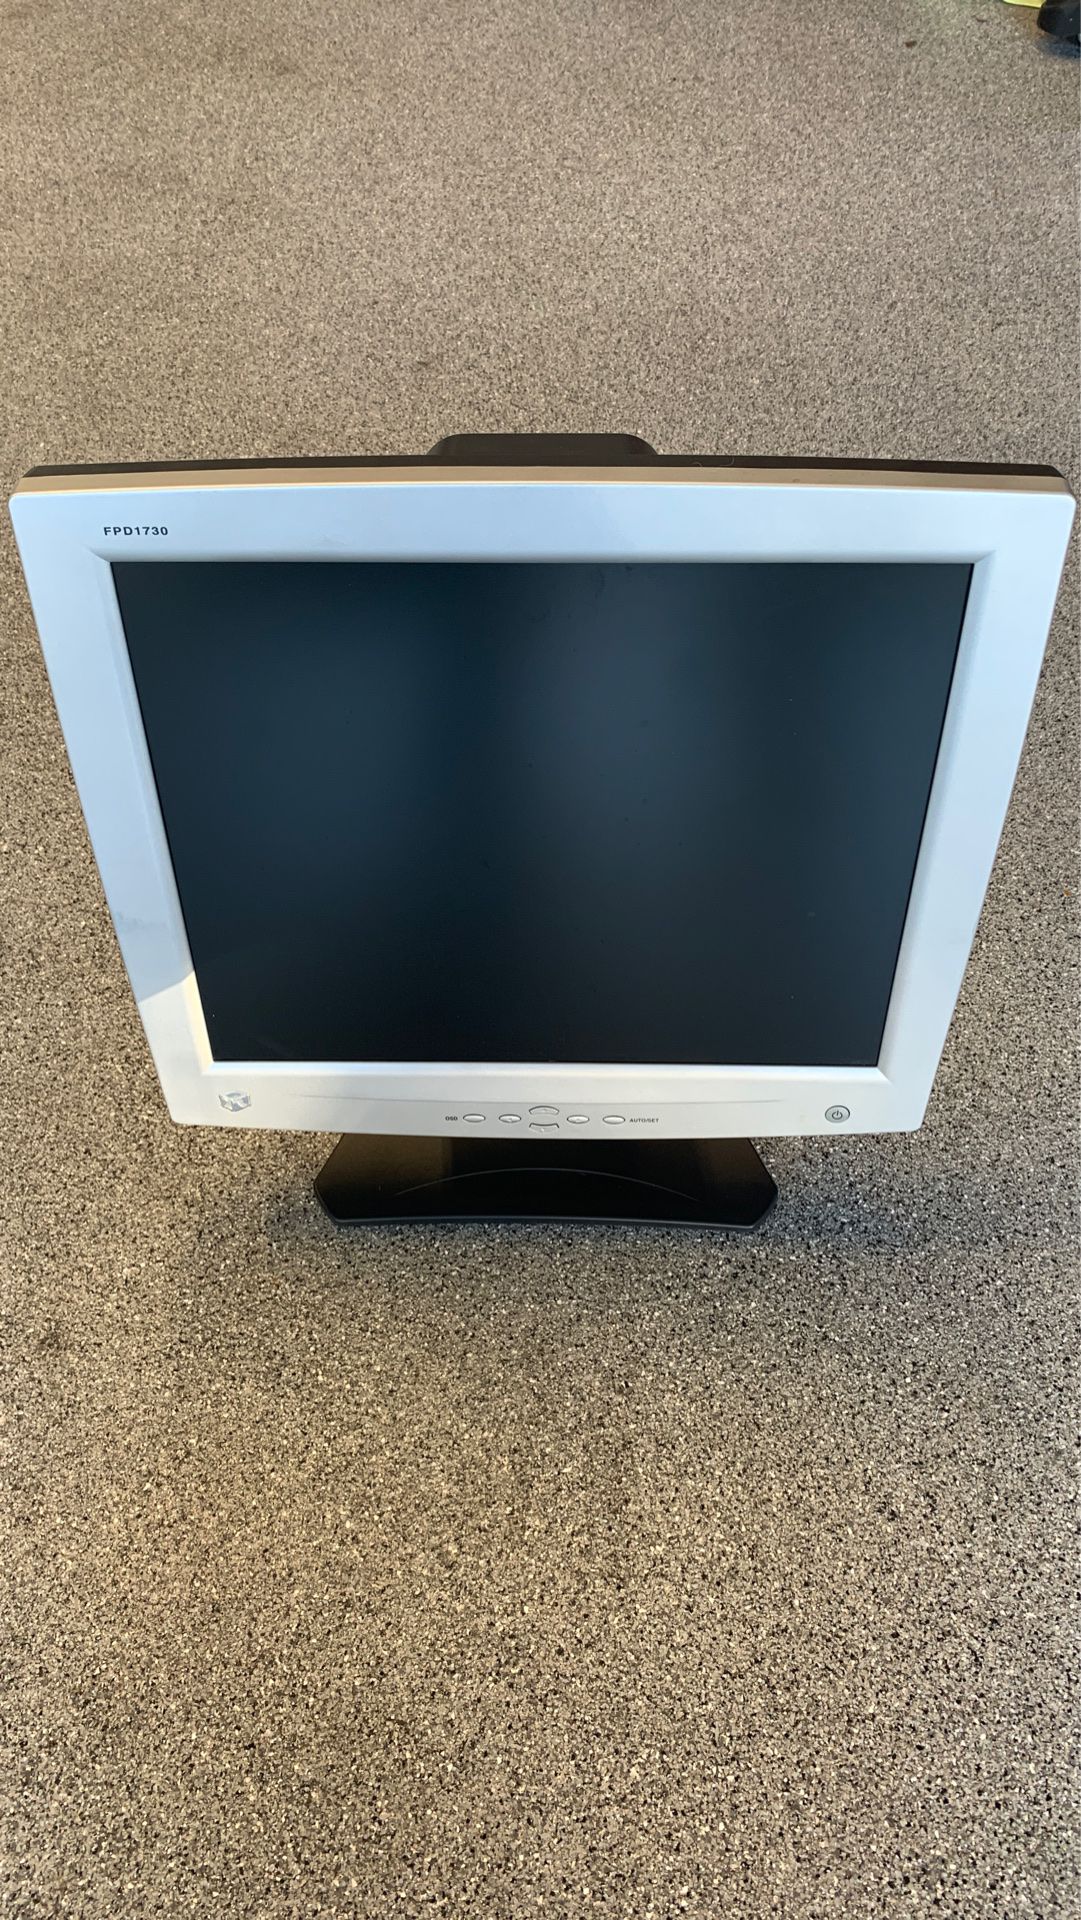 Used 17” Gateway computer monitor FPD1730